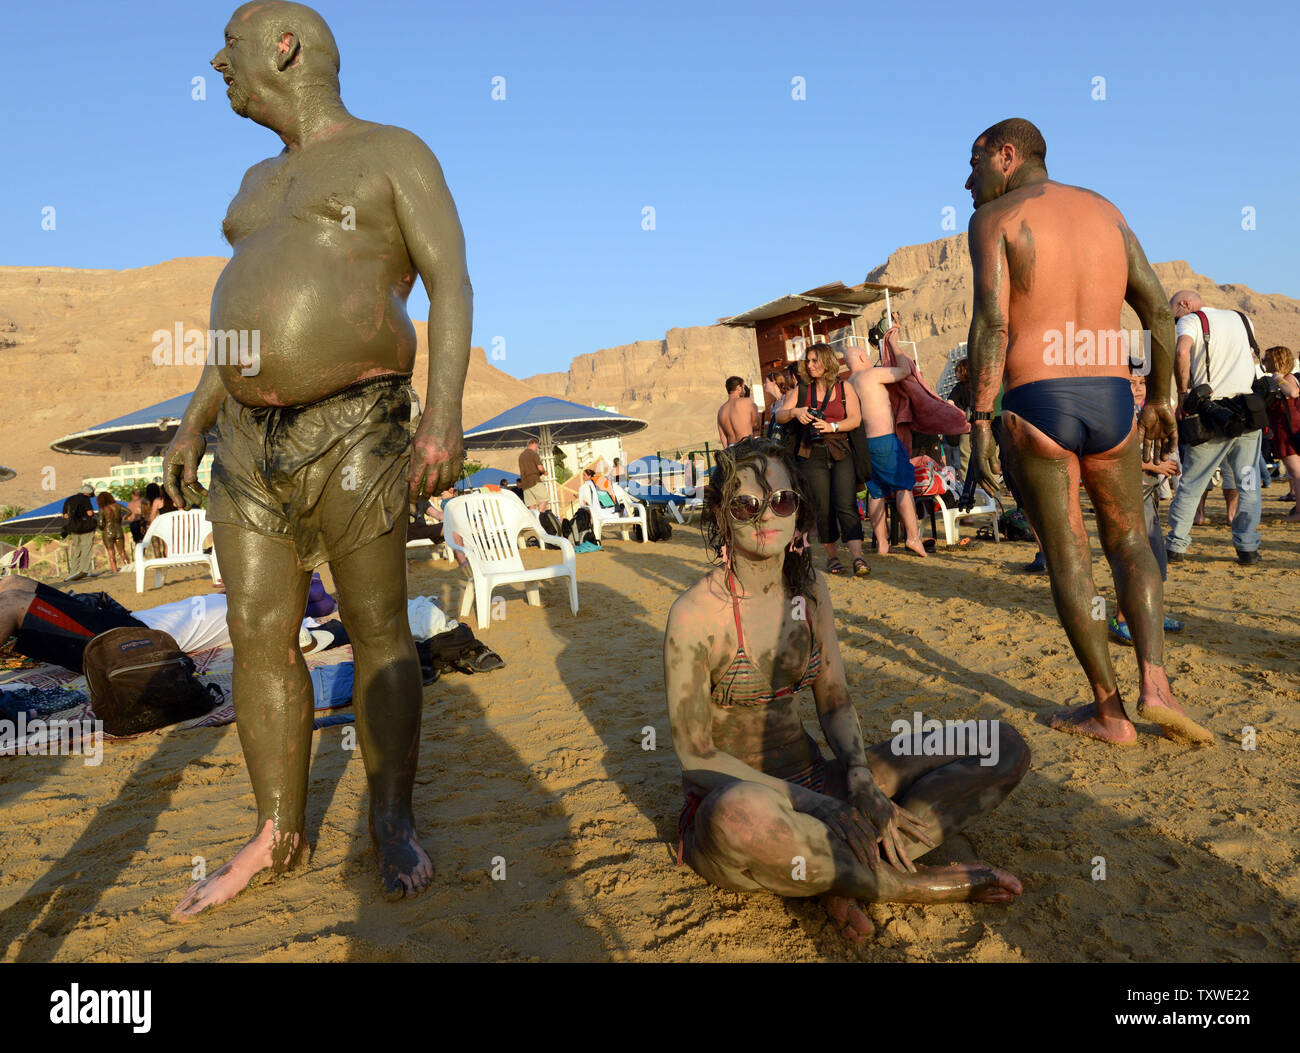 Israeli and international environmental and social activists wear black mud from the Dead Sea during a protest float at dawn against the deterioration of the Dead Sea, in an event organized by U.S. photographer Spencer Tunick, not seen, at Ein Bokek, Israel, September 14, 2012. UPI/Debbie Hill Stock Photo